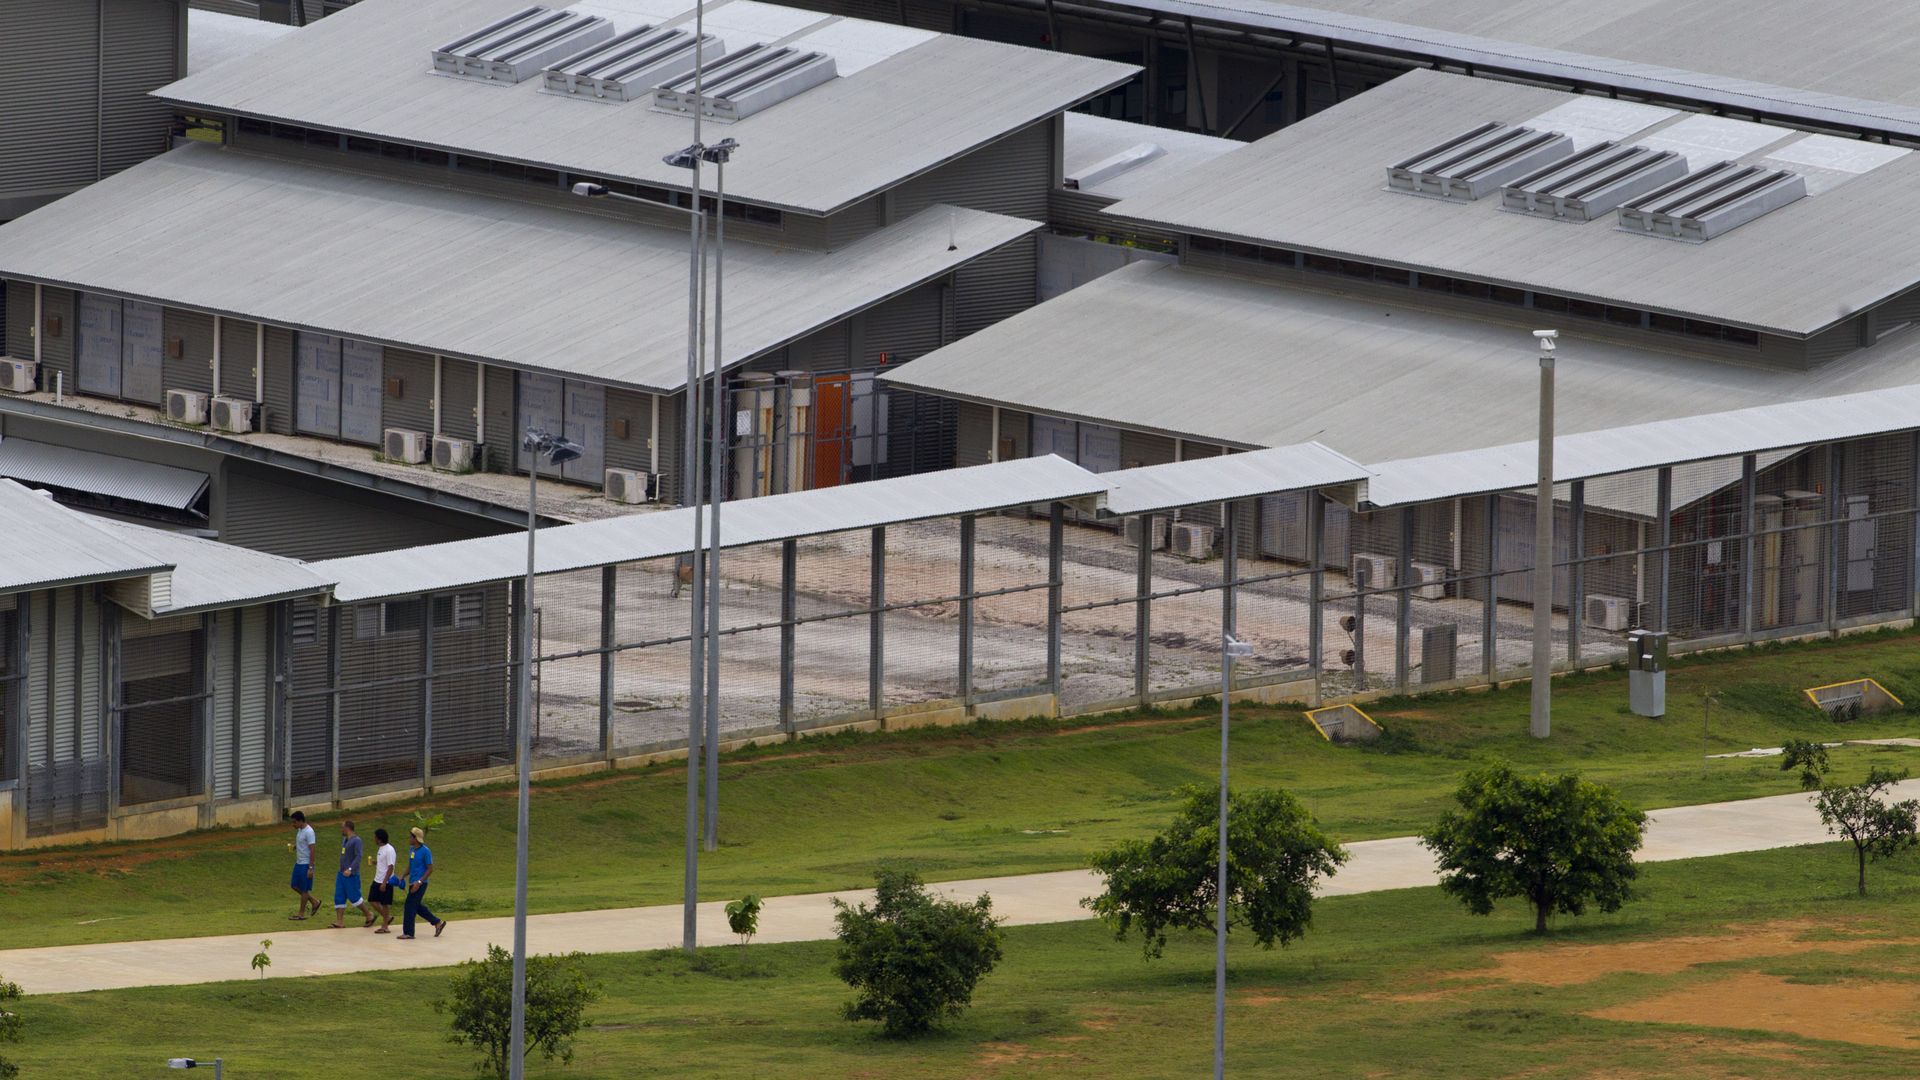 Detainees walk inside the Immigration Detention Center (IDC) compound February 25, 2012 on Christmas Island, Australia.